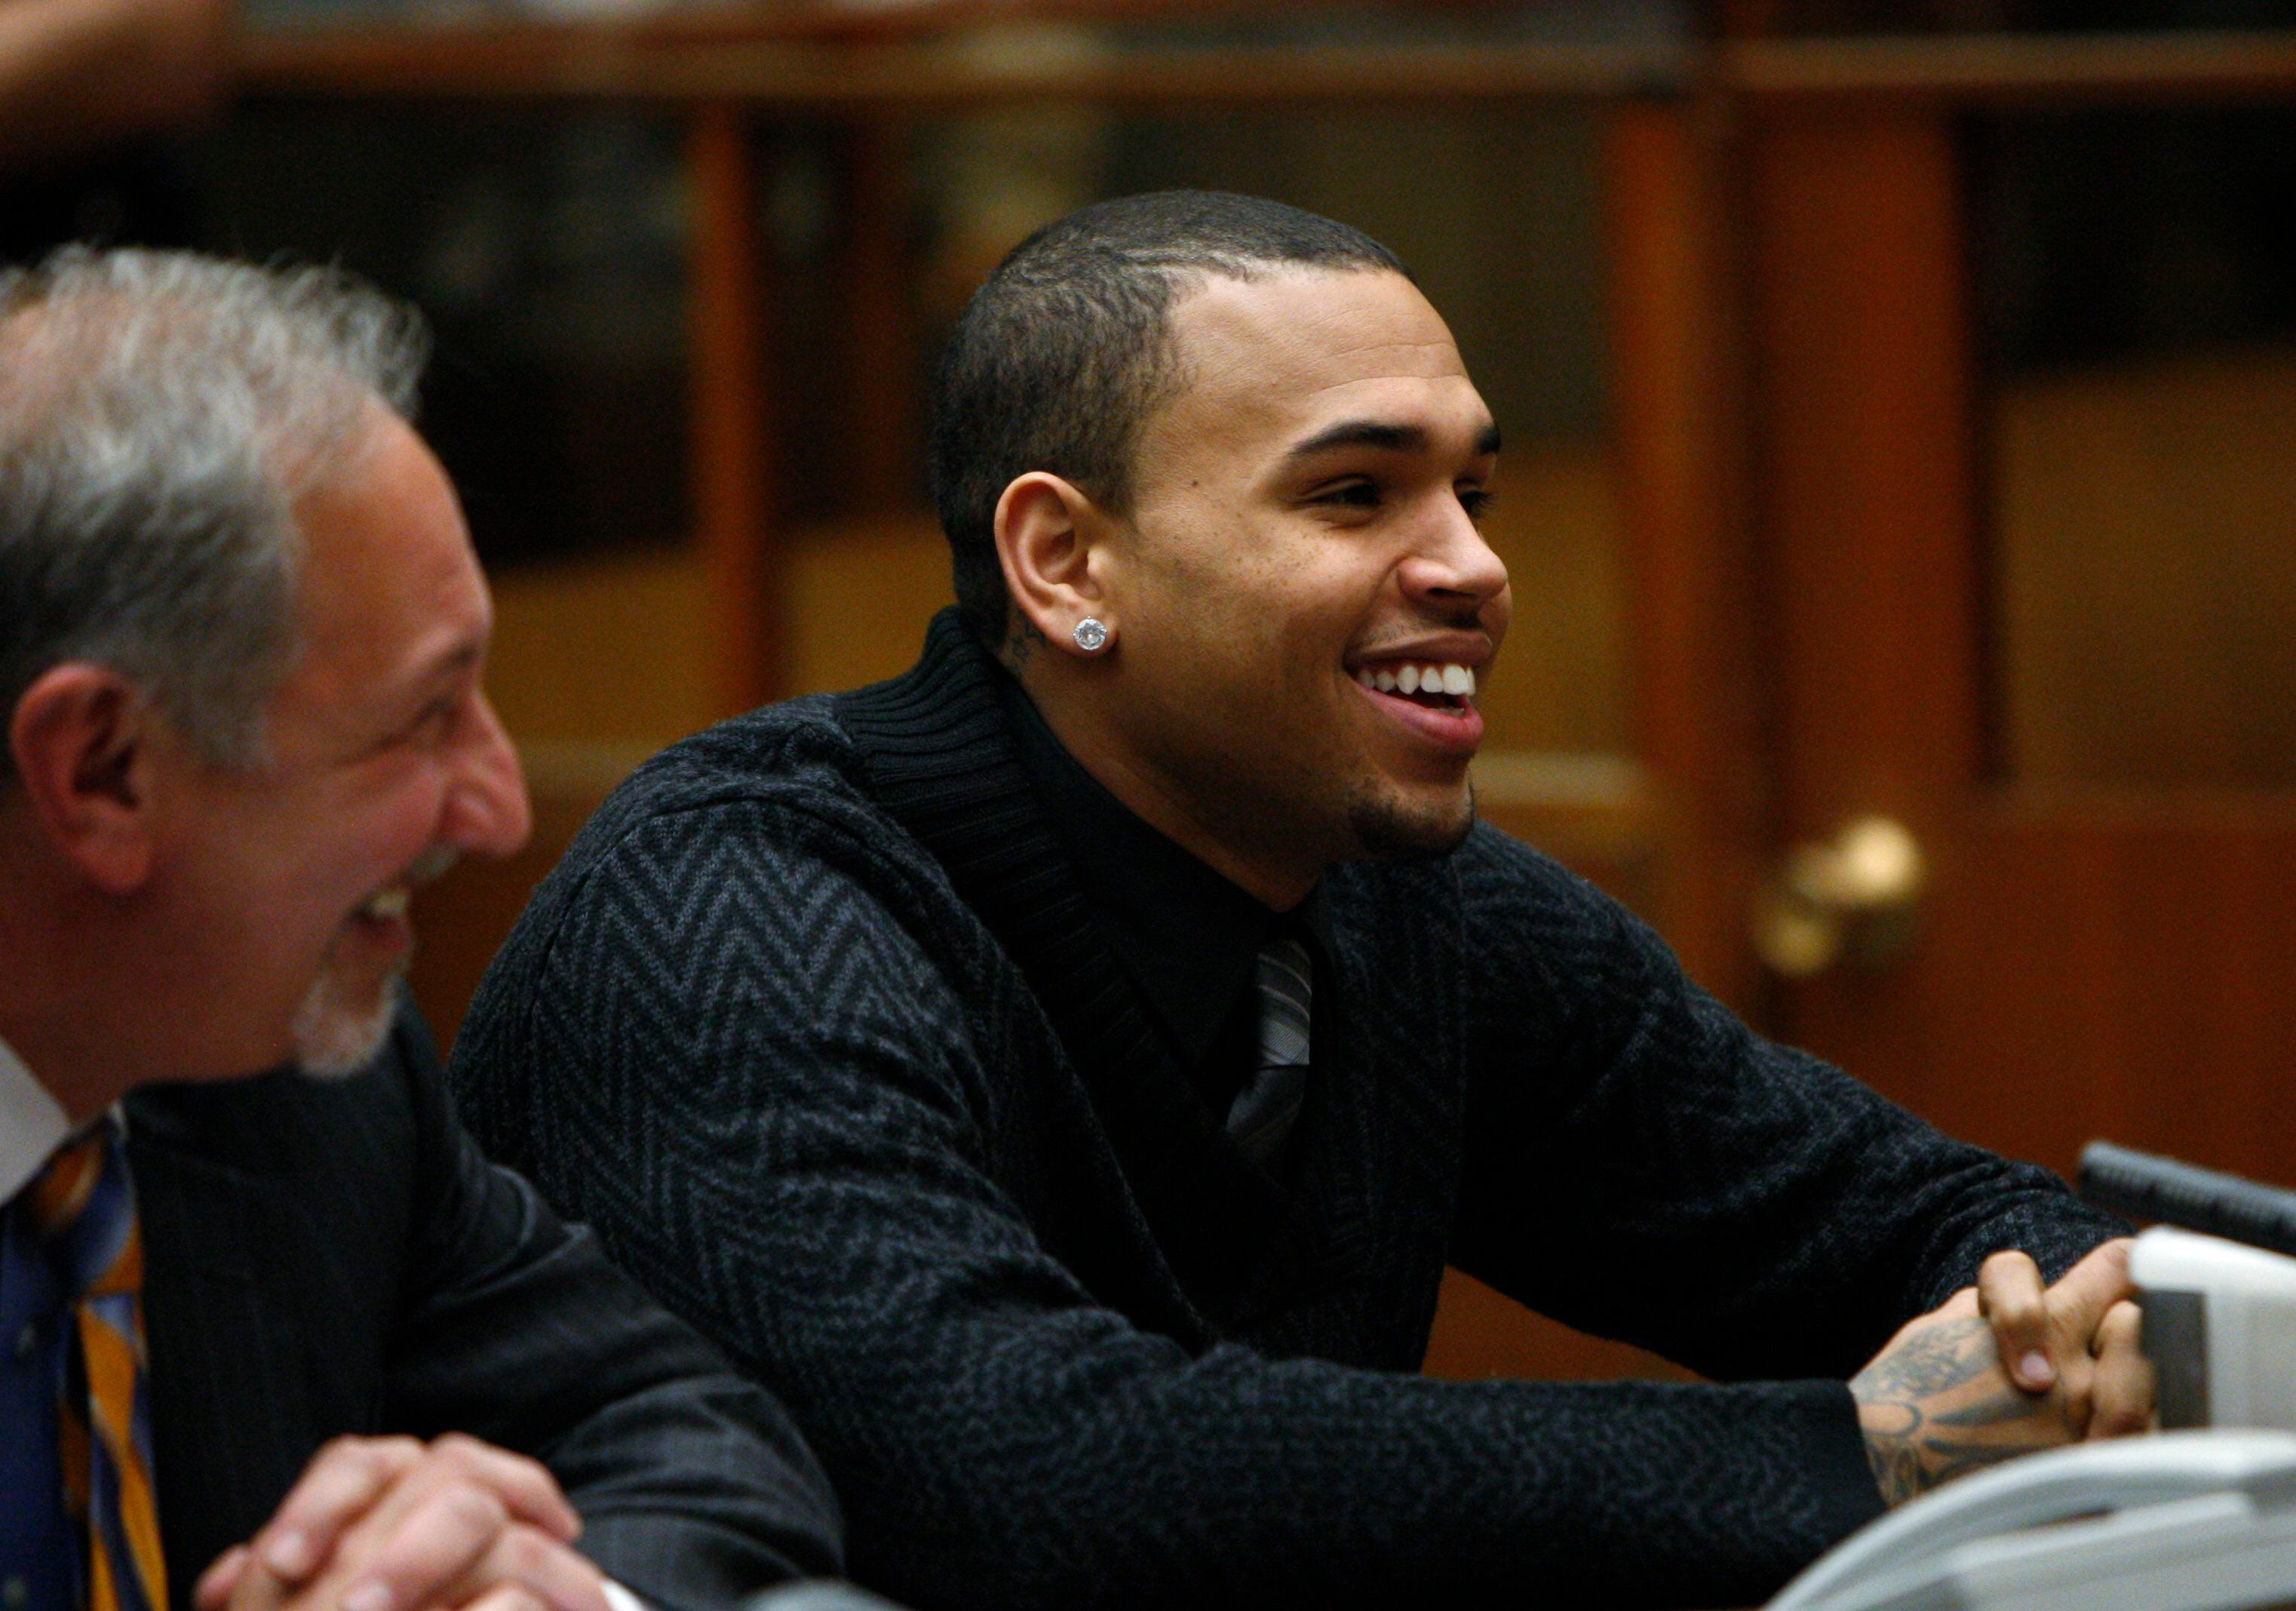 R&B singer Chris Brown appears for a progress report hearing in Los Angeles, Friday, Jan. 28, 2011. Brown pleaded guilty to assaulting his pop star girlfriend Rihanna in Hancock Park after a pre-Grammy Awards party in 2009. He was sentenced to five years probation, ordered to complete 180 days of community labor and a year of domestic violence counseling. (AP Photo/David McNew, Pool)